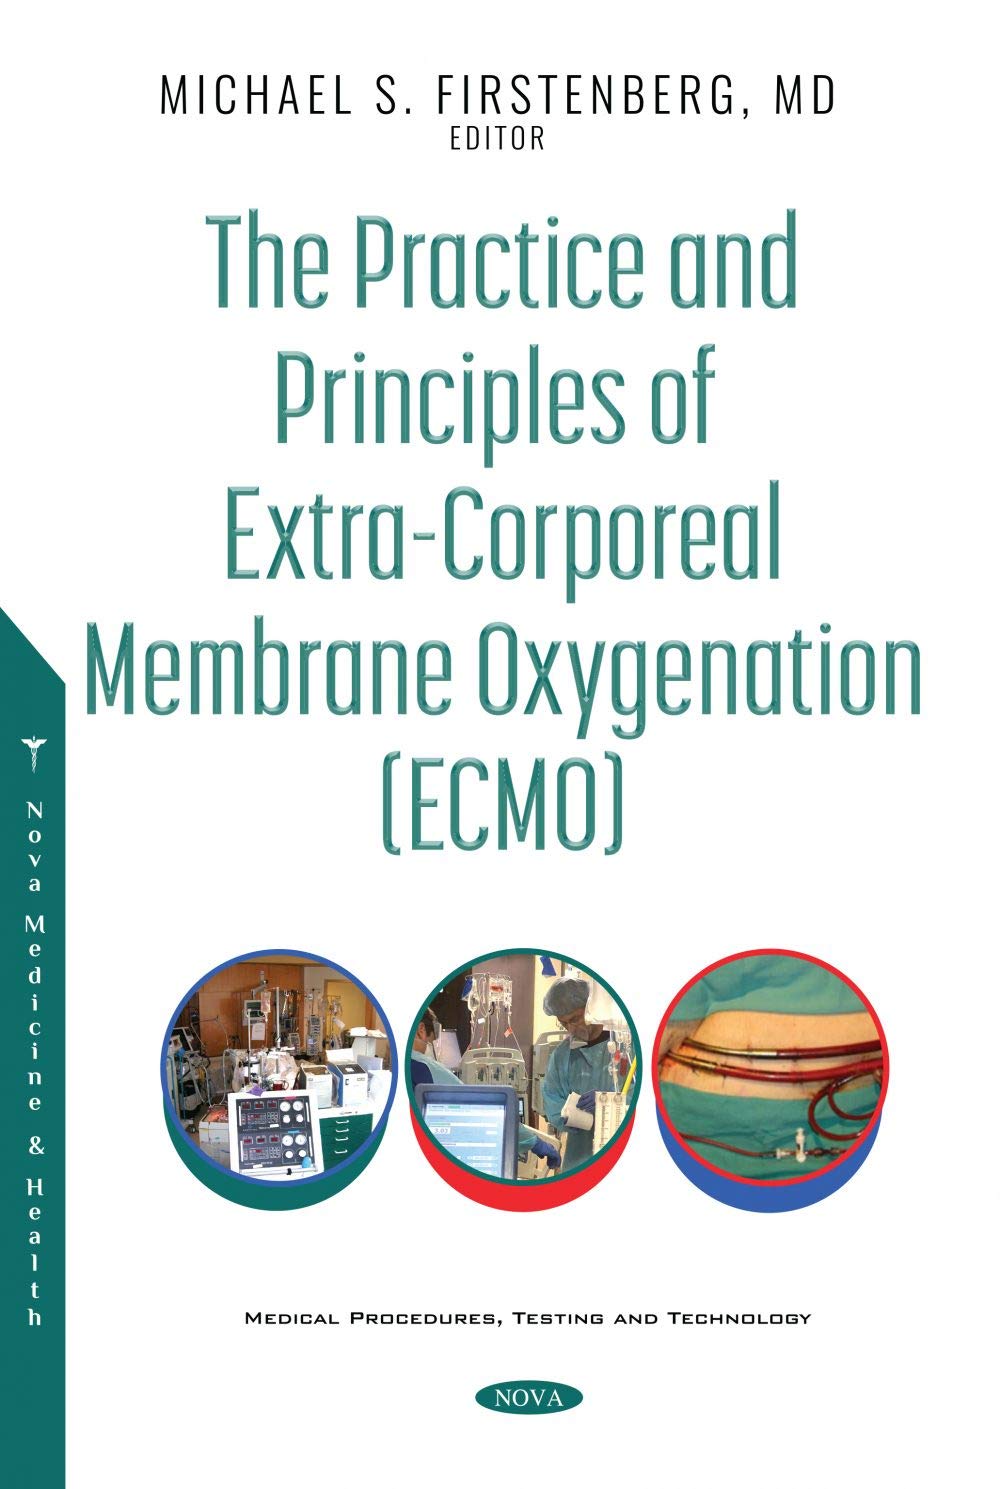 The Practice and Principles of Extra-corporeal Membrane Oxygenation Ecmo by Nova Science Pub Inc (January 27, 2021)